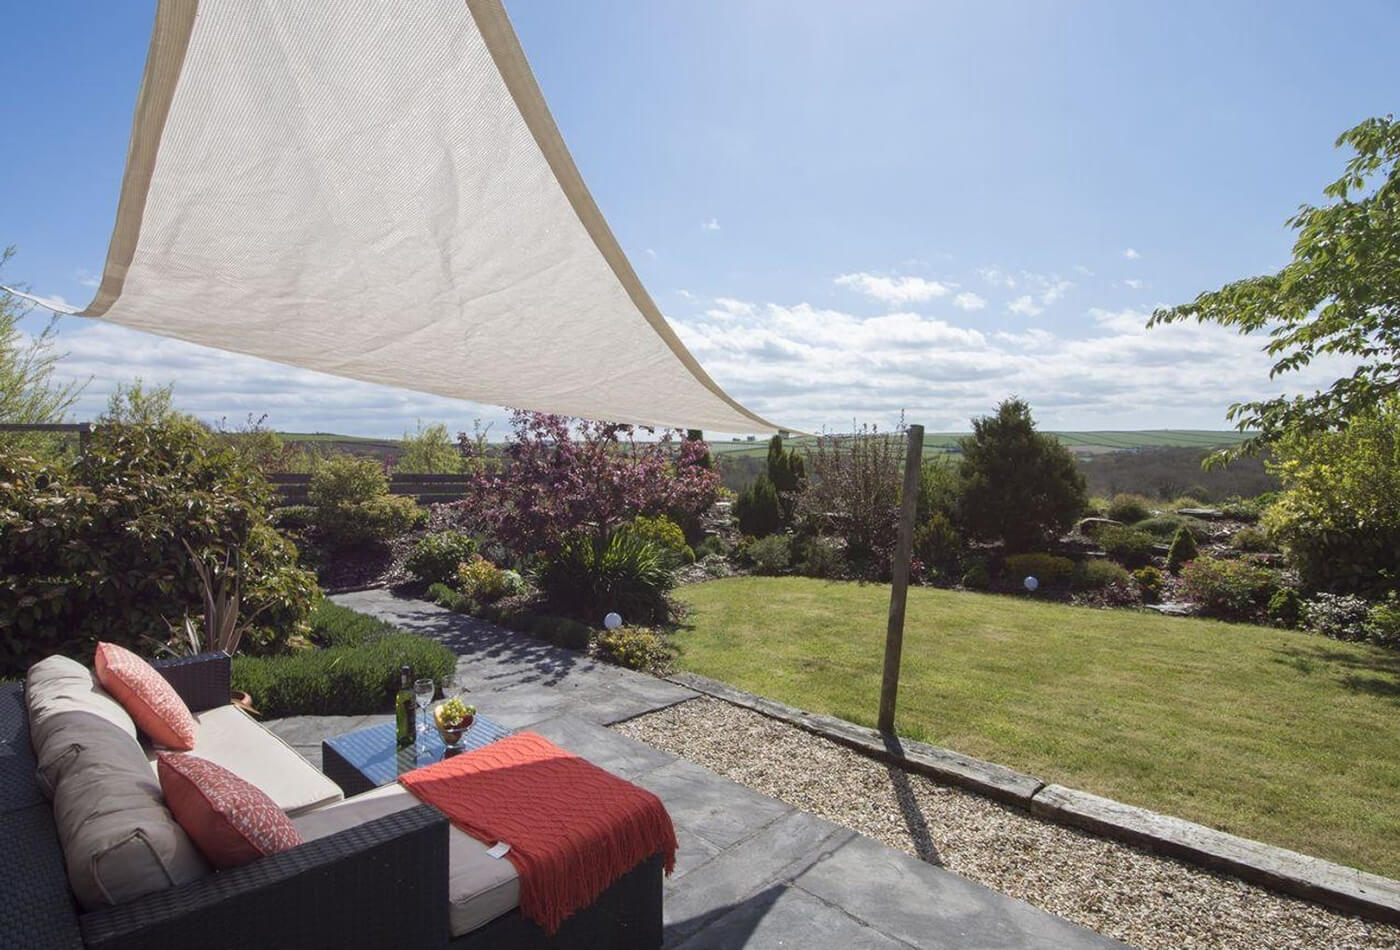 A 5 star luxury cottage with sunshade sail, patio furniture and rolling hill views.